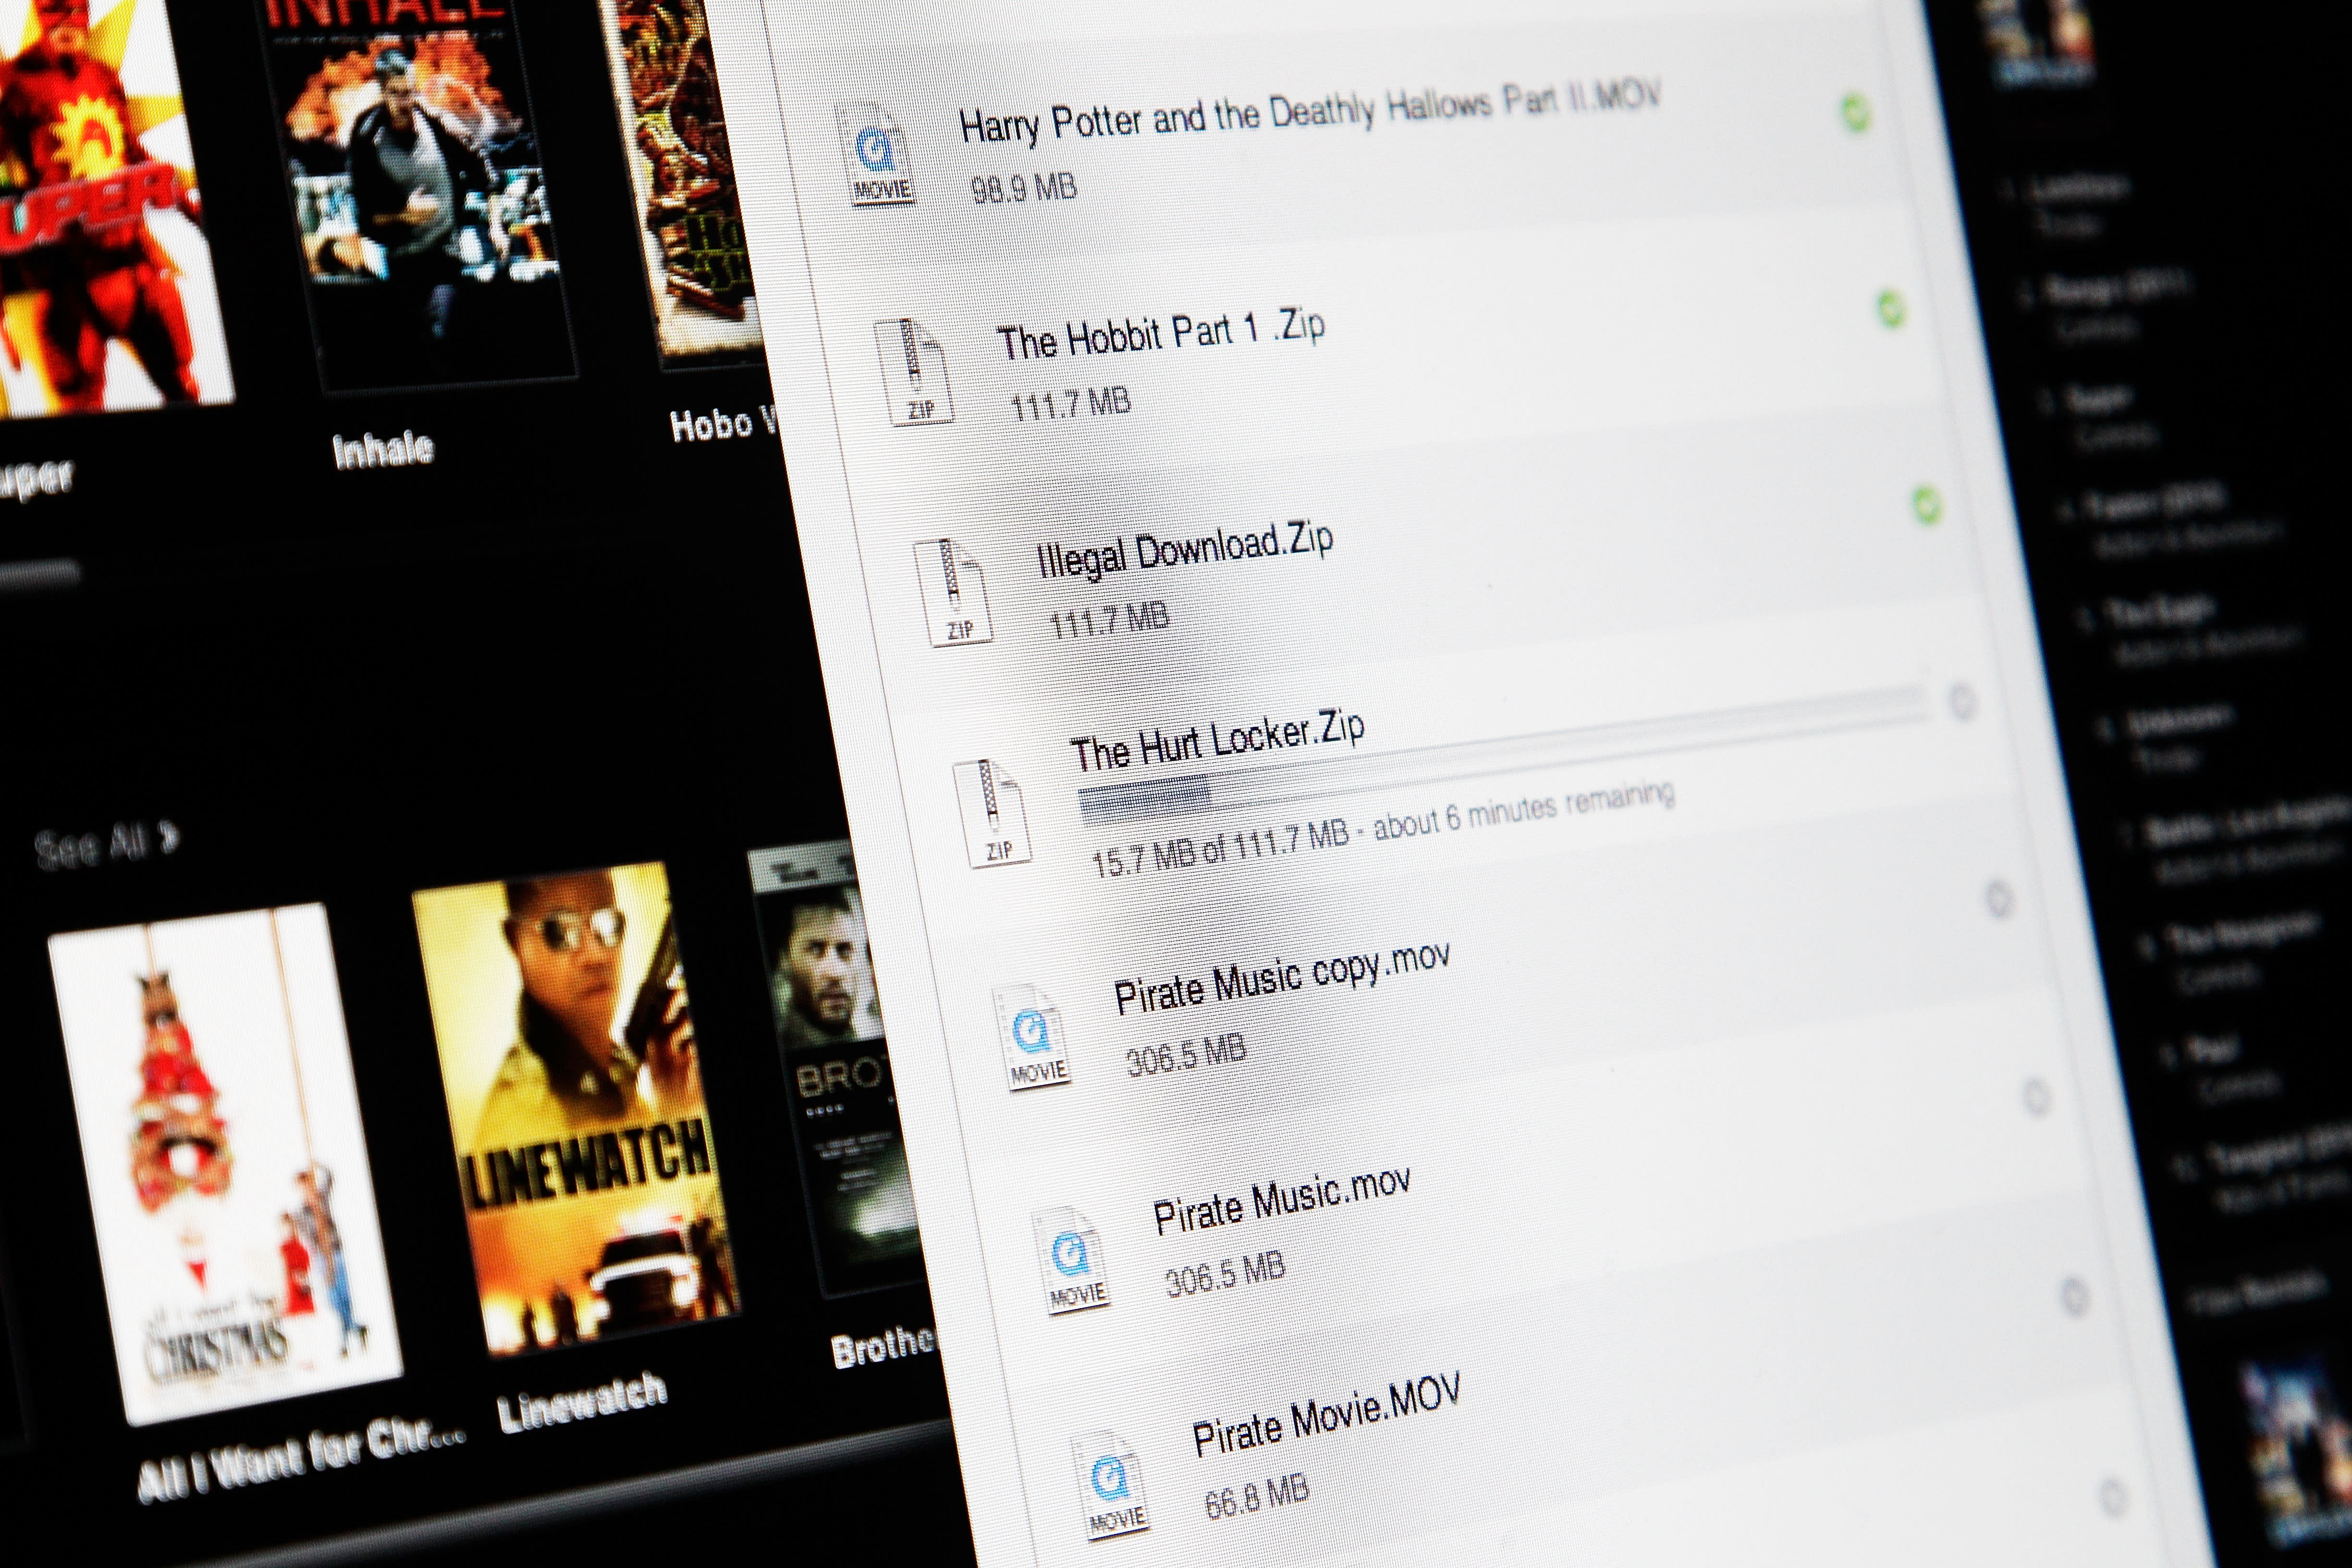 Studios experiment with release models what that means for film piracy